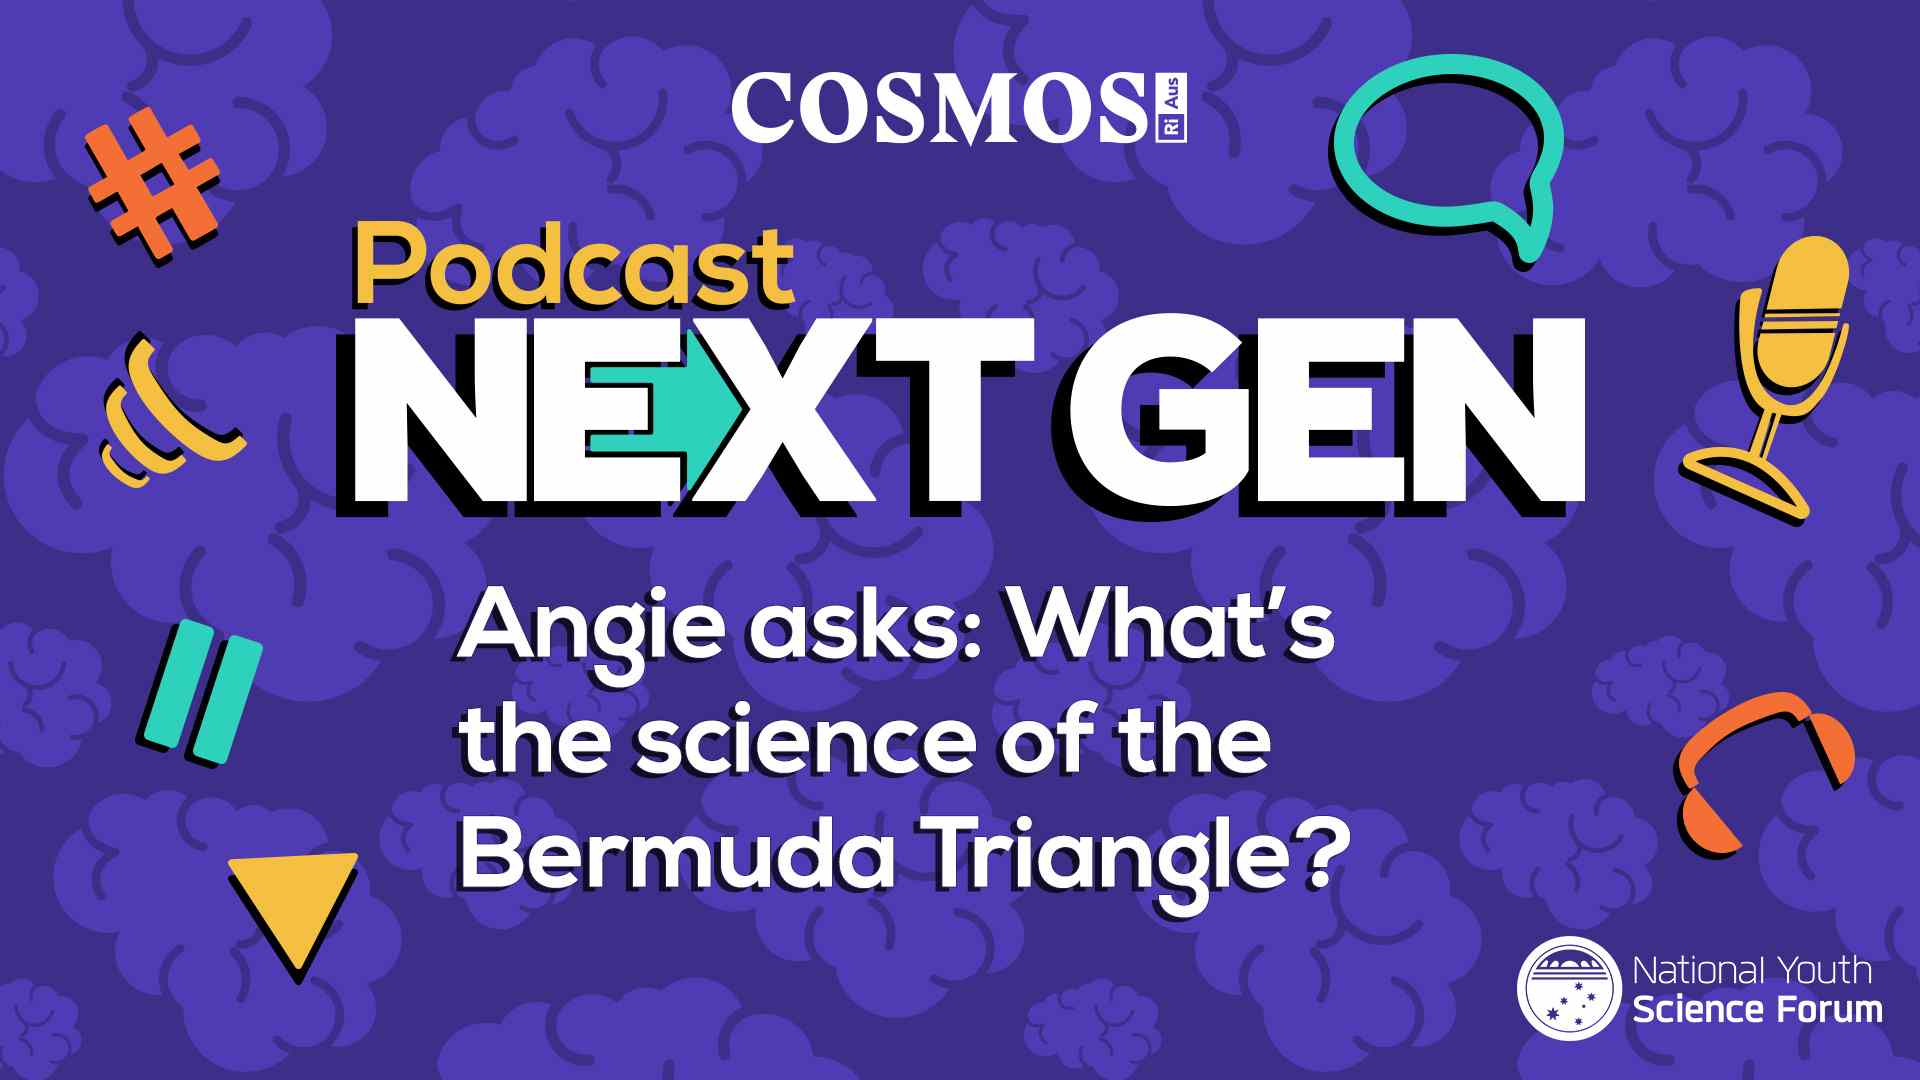 PODCAST NEXT GEN: What’s the science of the Bermuda Triangle?